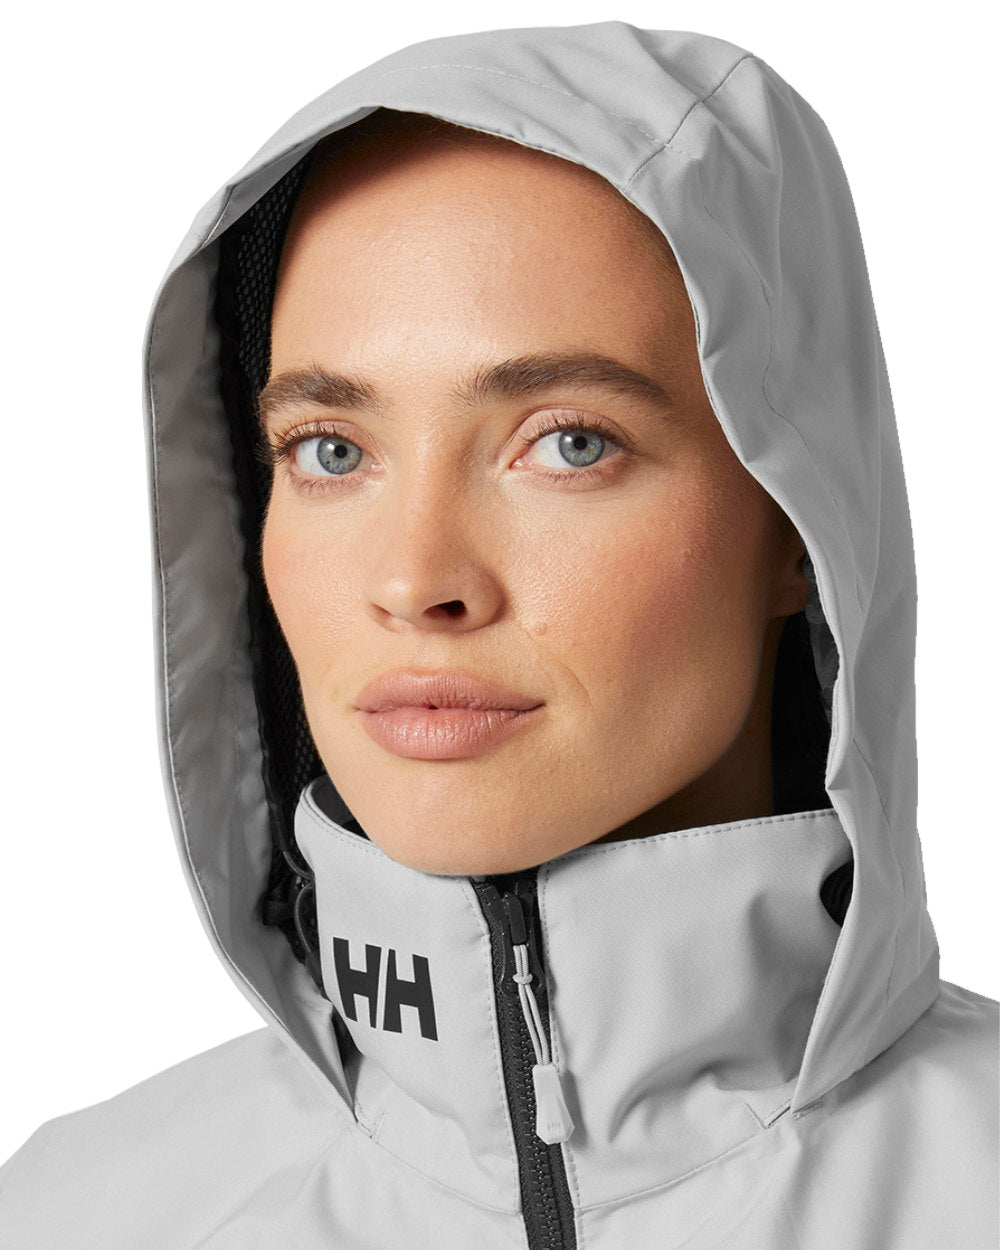 Grey Fog Coloured Helly Hansen Womens Crew Hooded Midlayer Sailing Jacket 2.0 On A White Background 